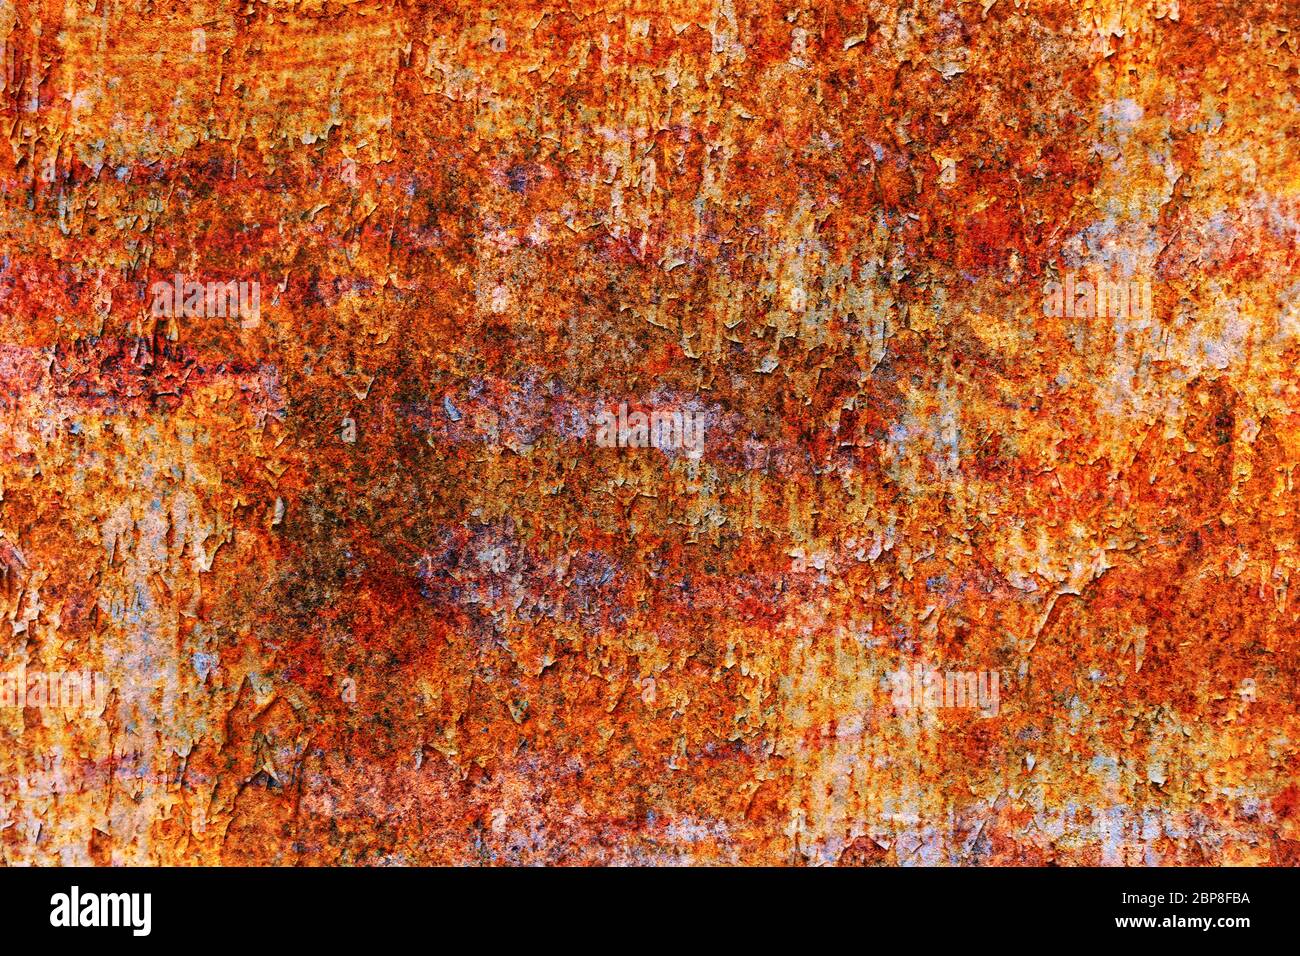 Grunge metal coroded texture. Old rusty metal plate heavily aged corrosion stain creates a grungy frame. Stock Photo